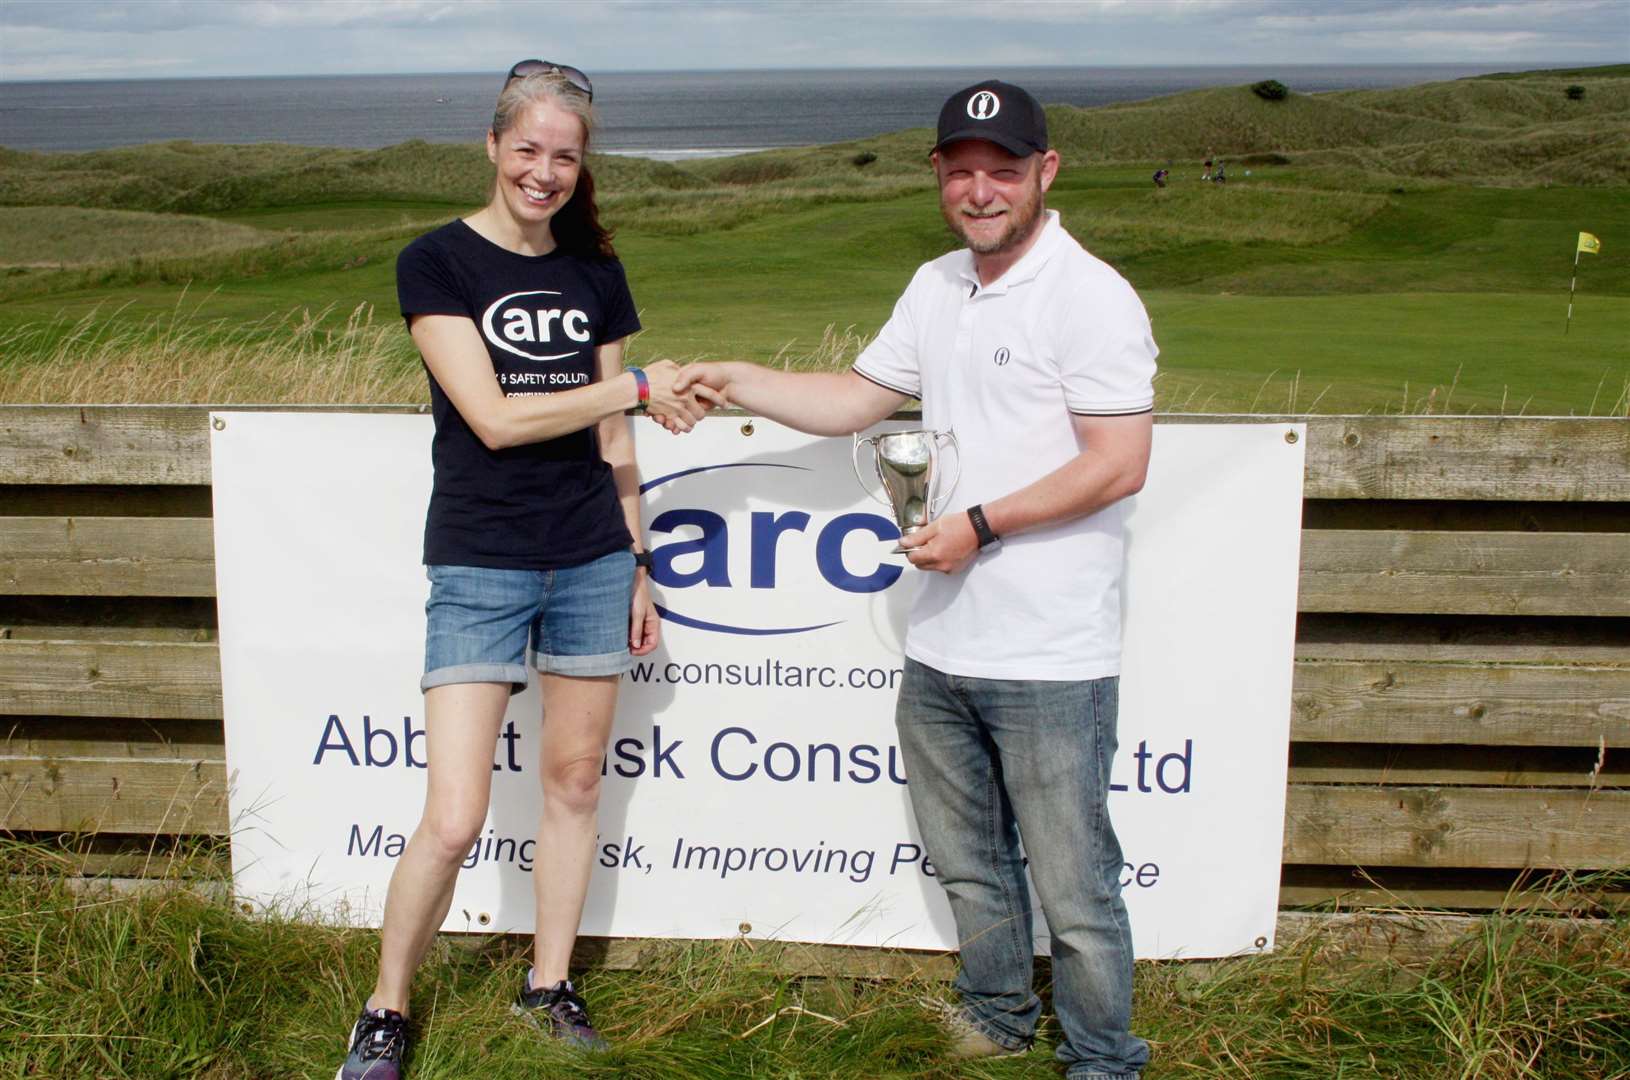 Marianne Wilson of Abbott Risk Consulting presenting the Summer Stableford trophy to winner Jason Norwood.